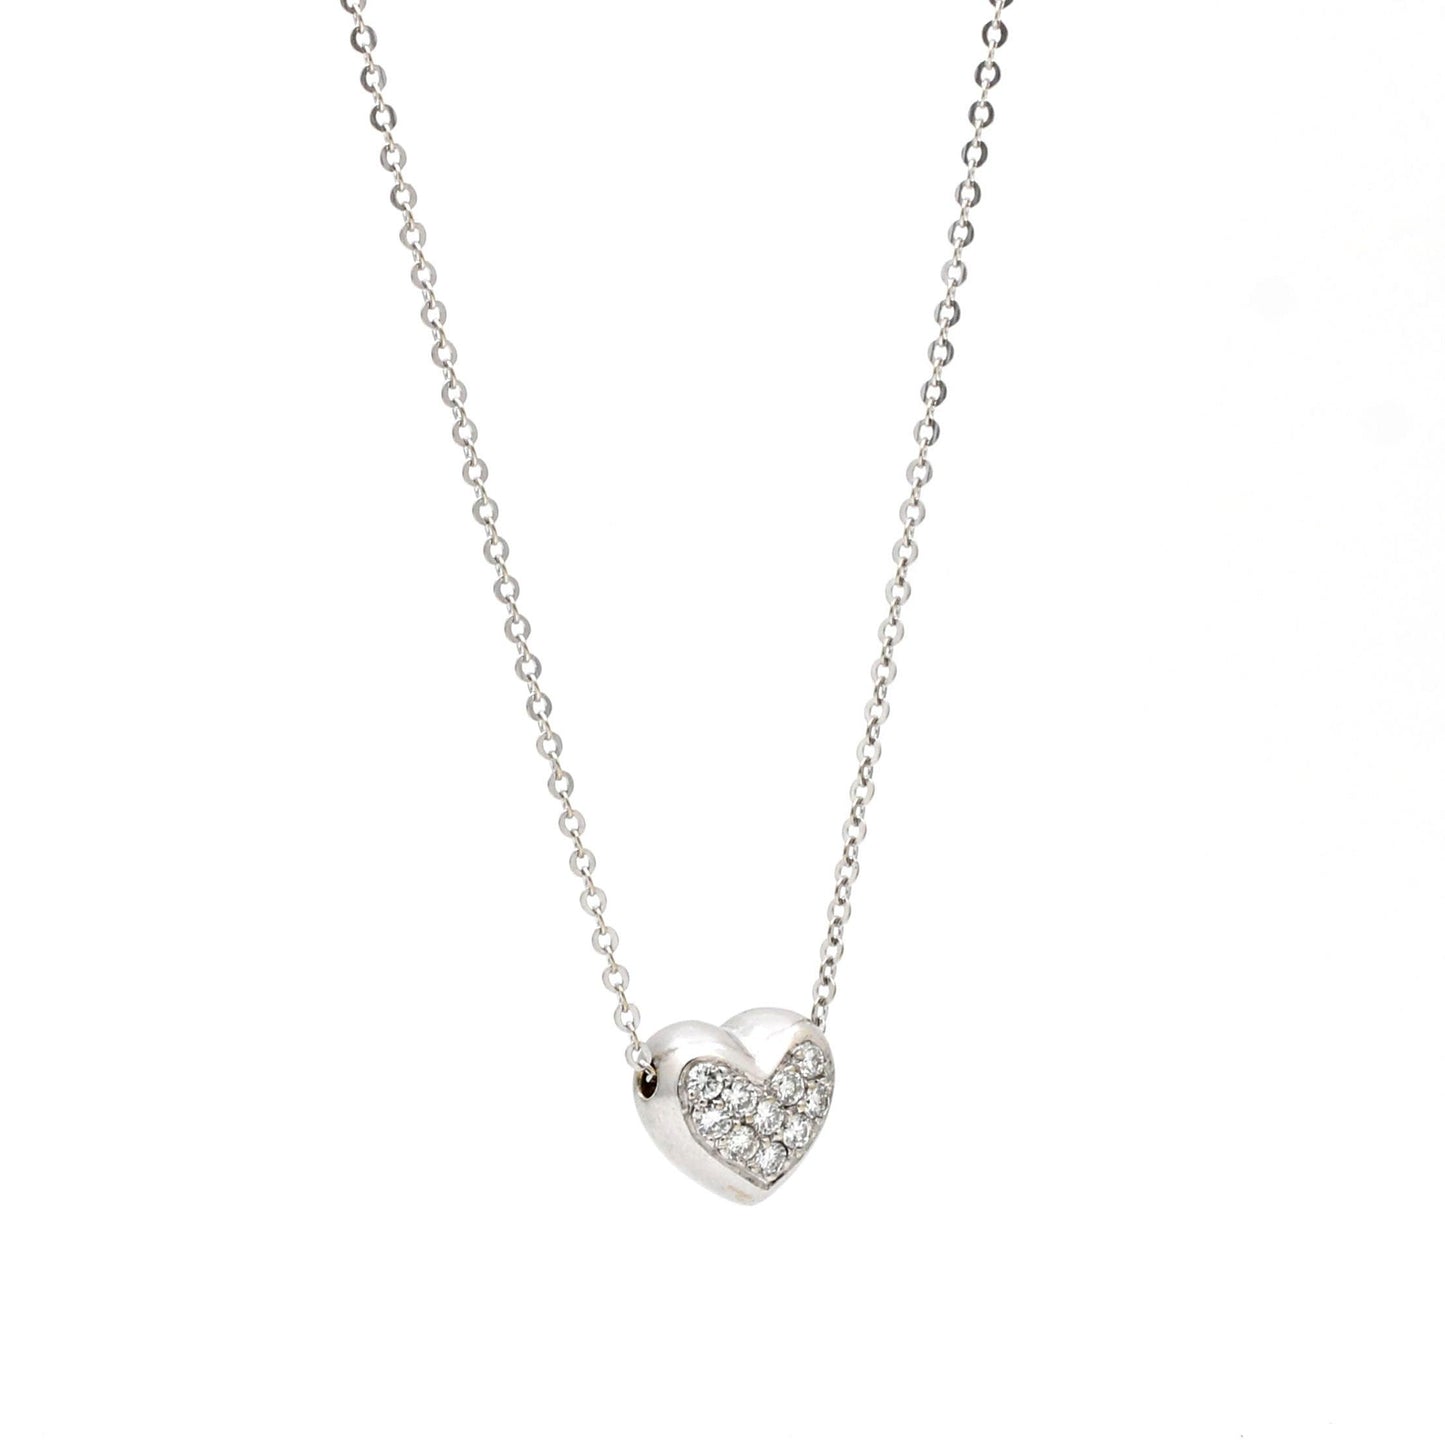 Women's Pave Diamond Heart Pendant Necklace in 14k White Gold - 31 Jewels Inc.